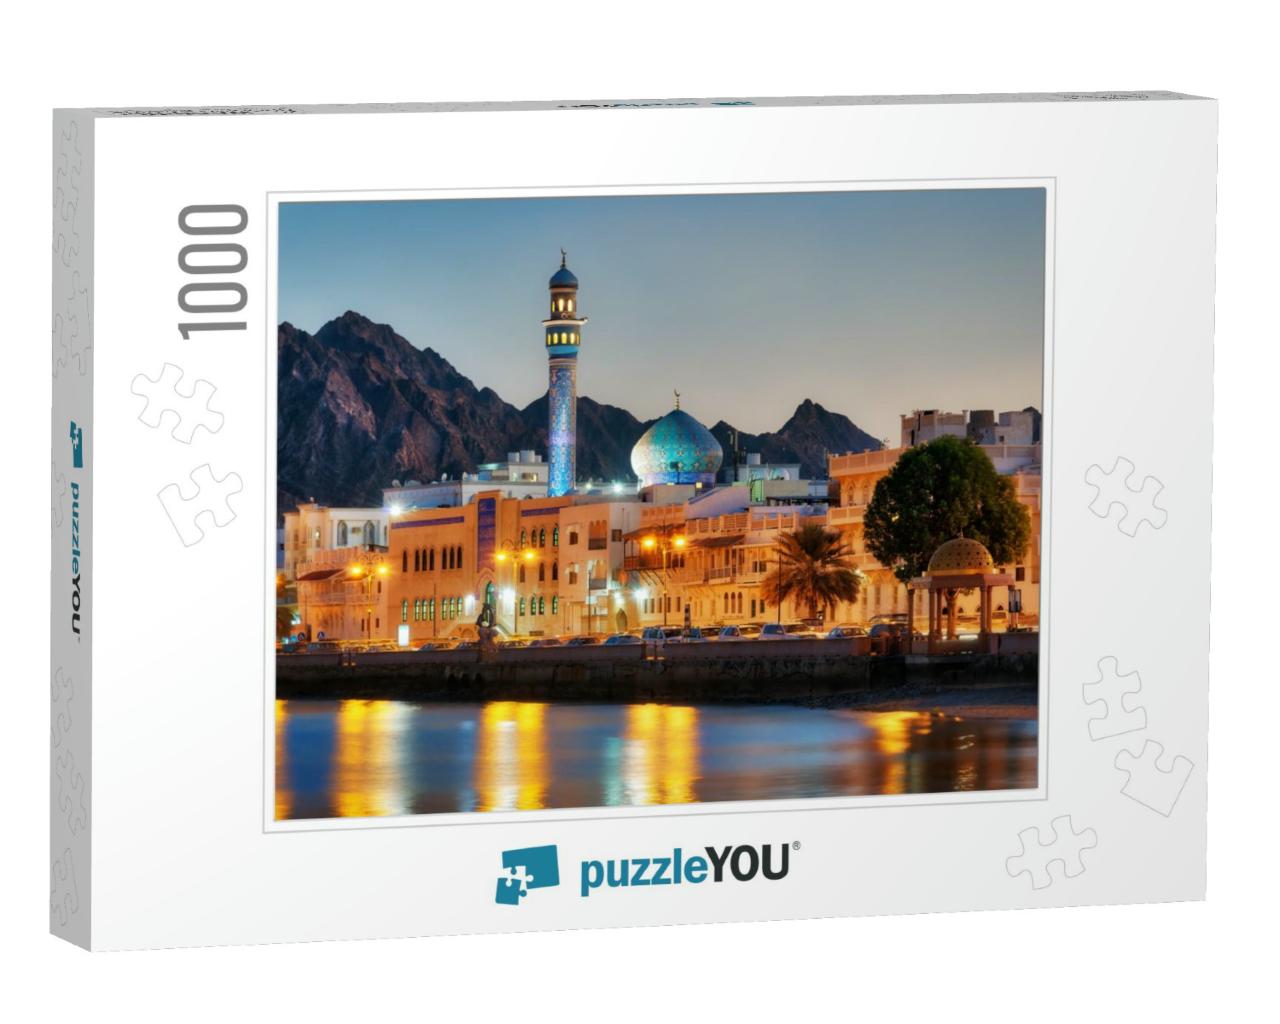 Muttrah Corniche, Muscat, Oman... Jigsaw Puzzle with 1000 pieces